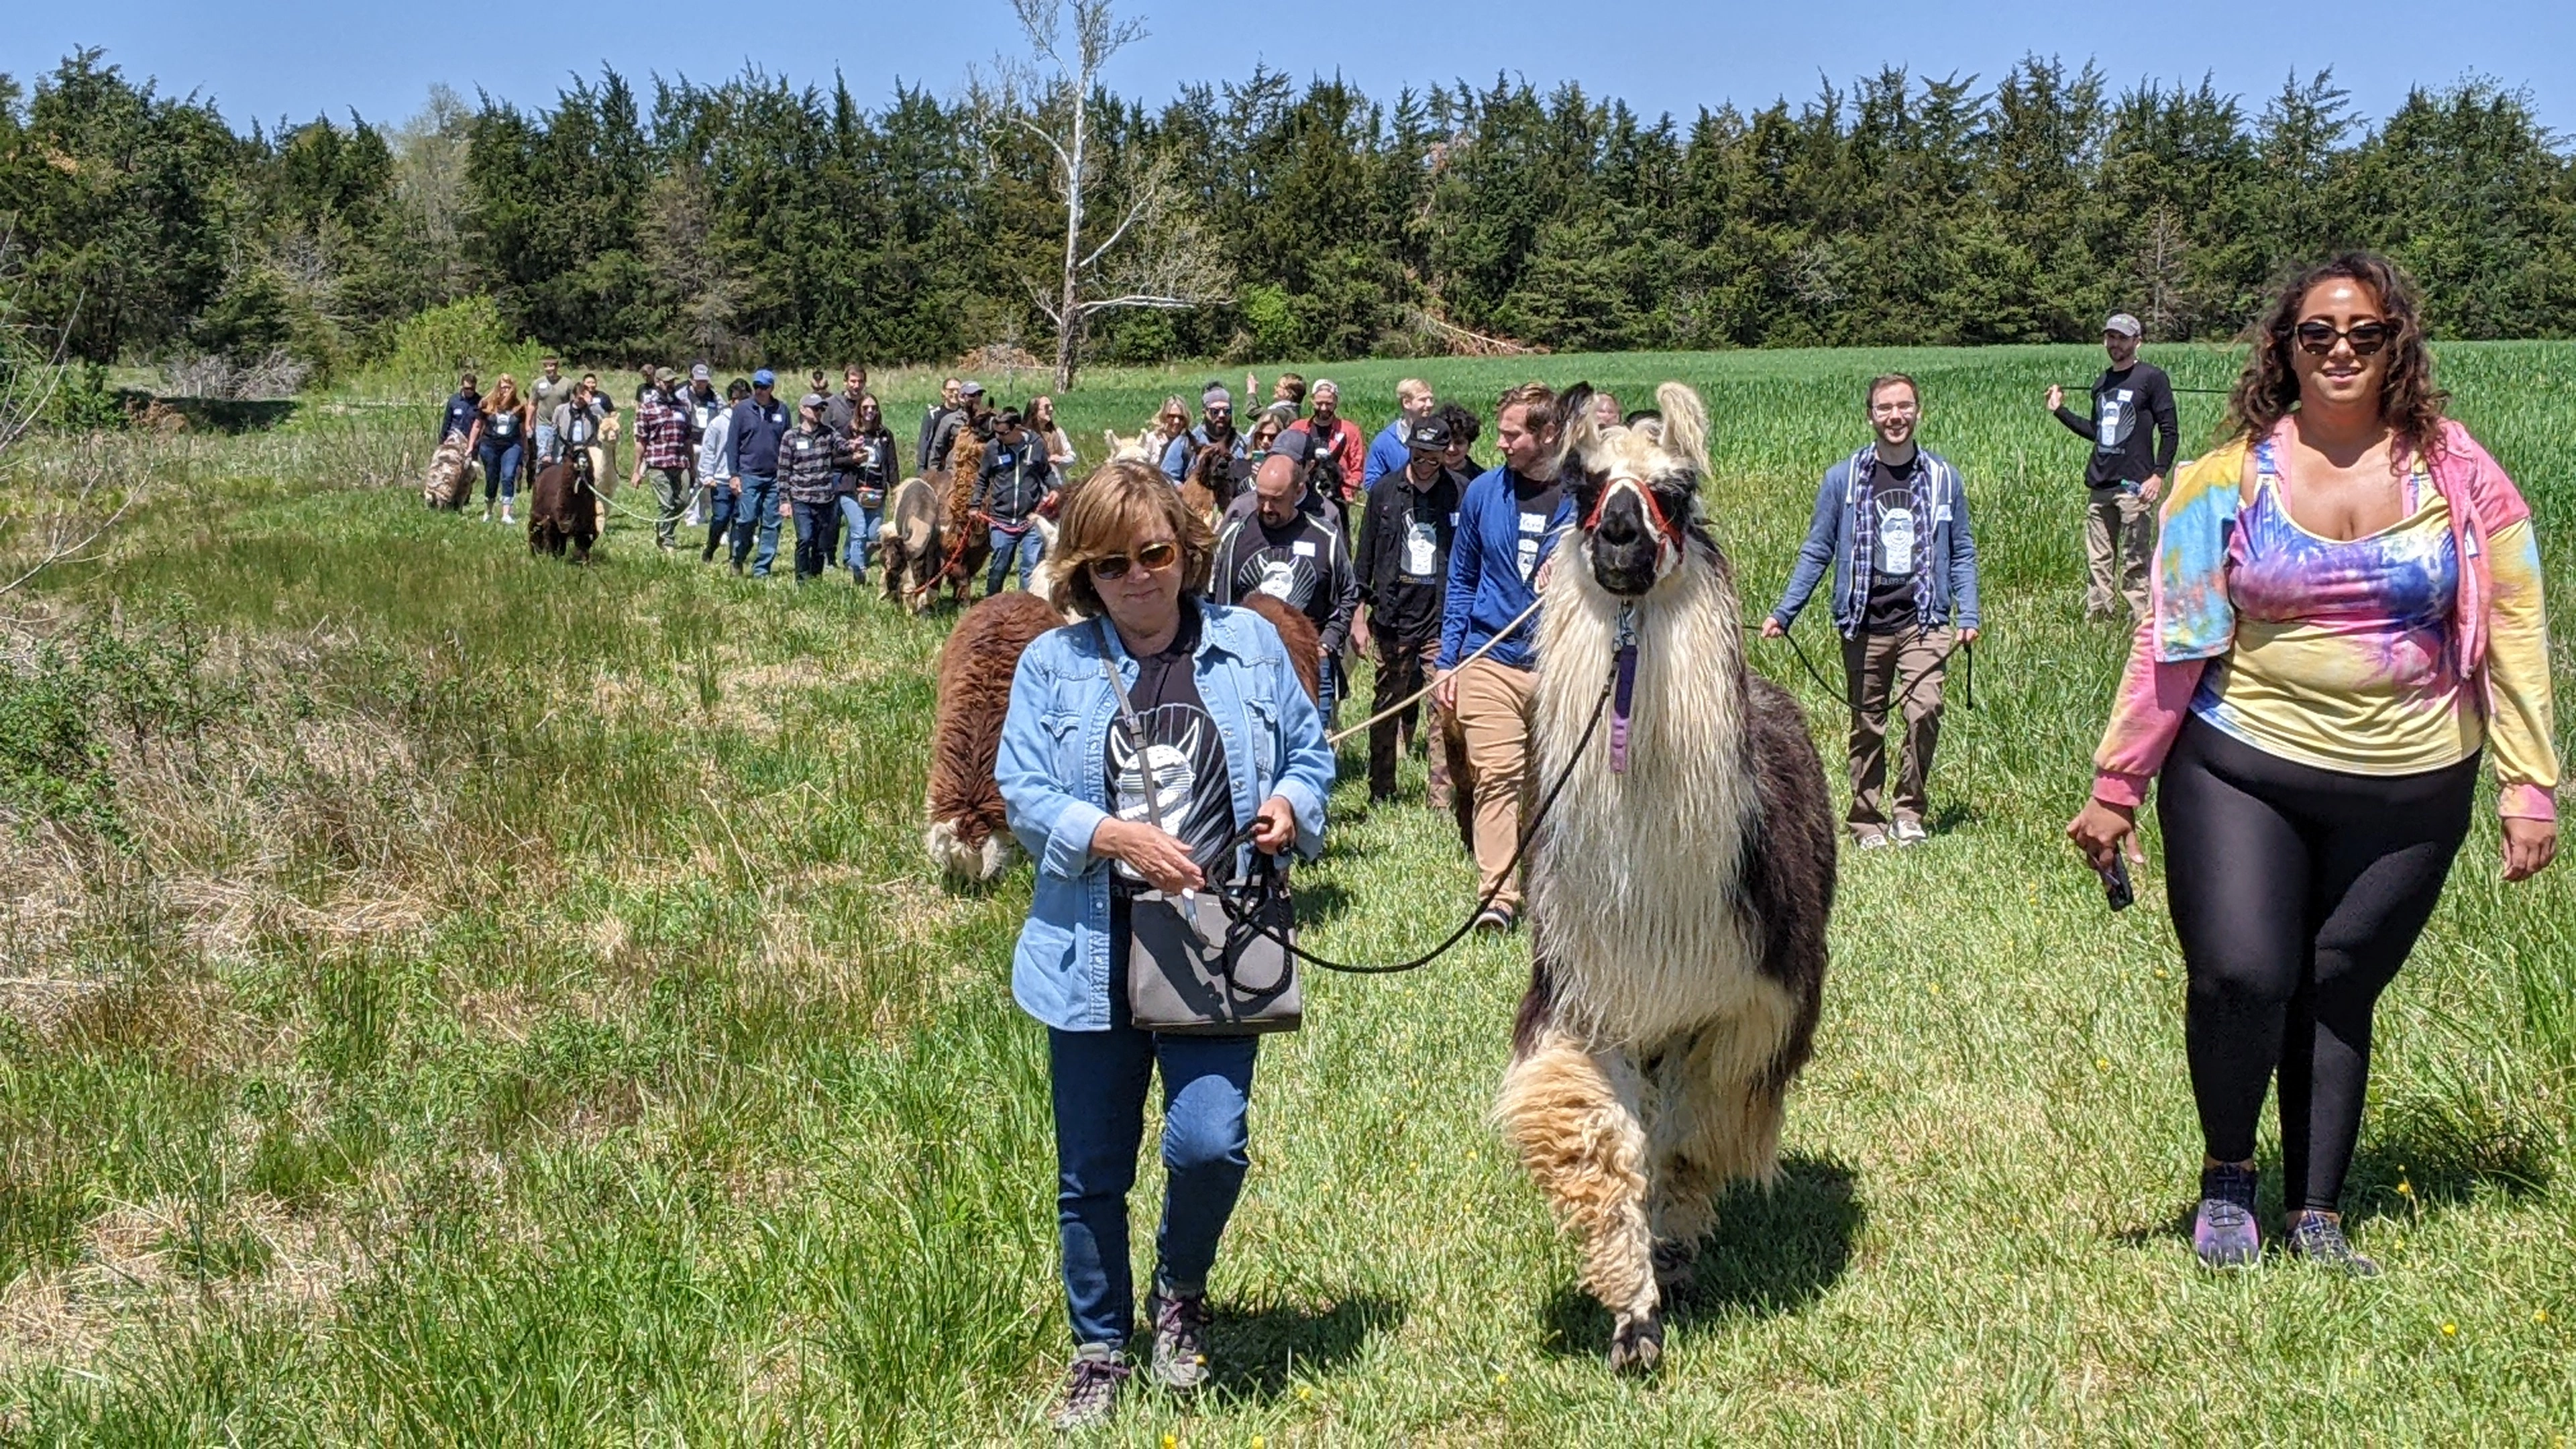 A number of llamas taking part in a corporate event